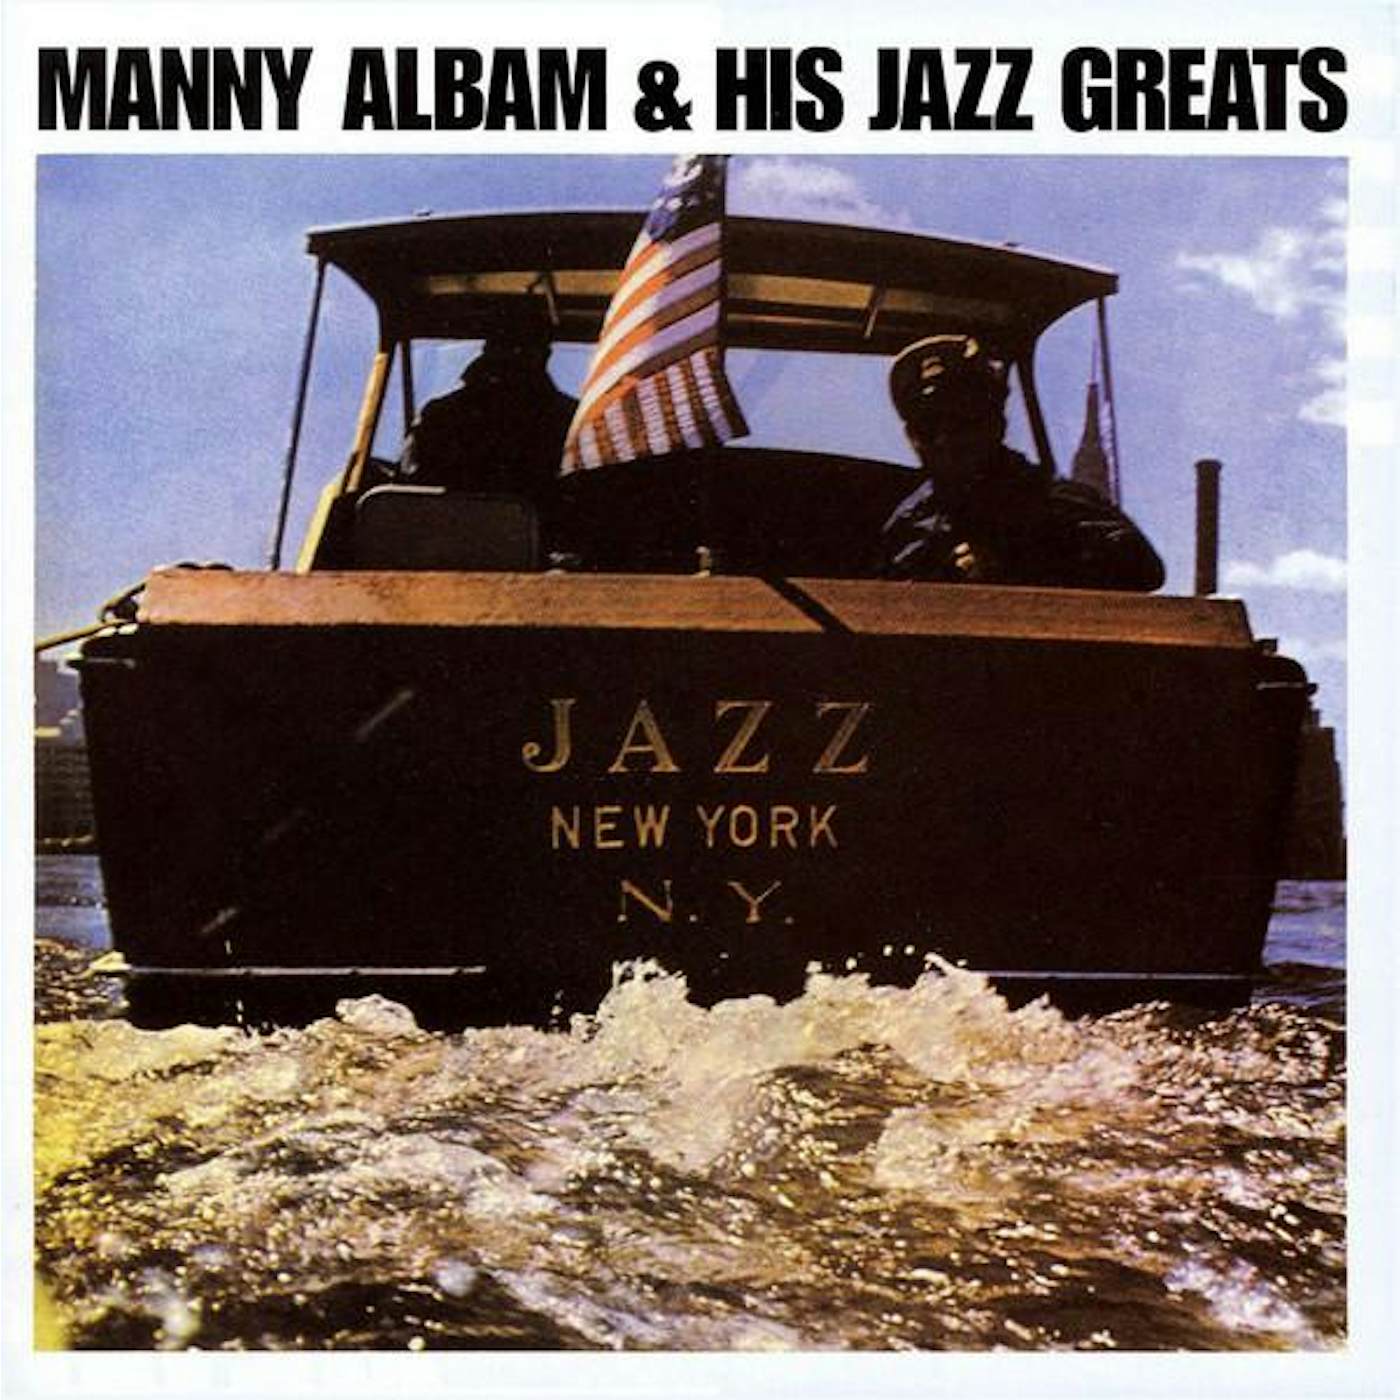 MANNY ALBAM AND HIS JAZZ GREATS CD